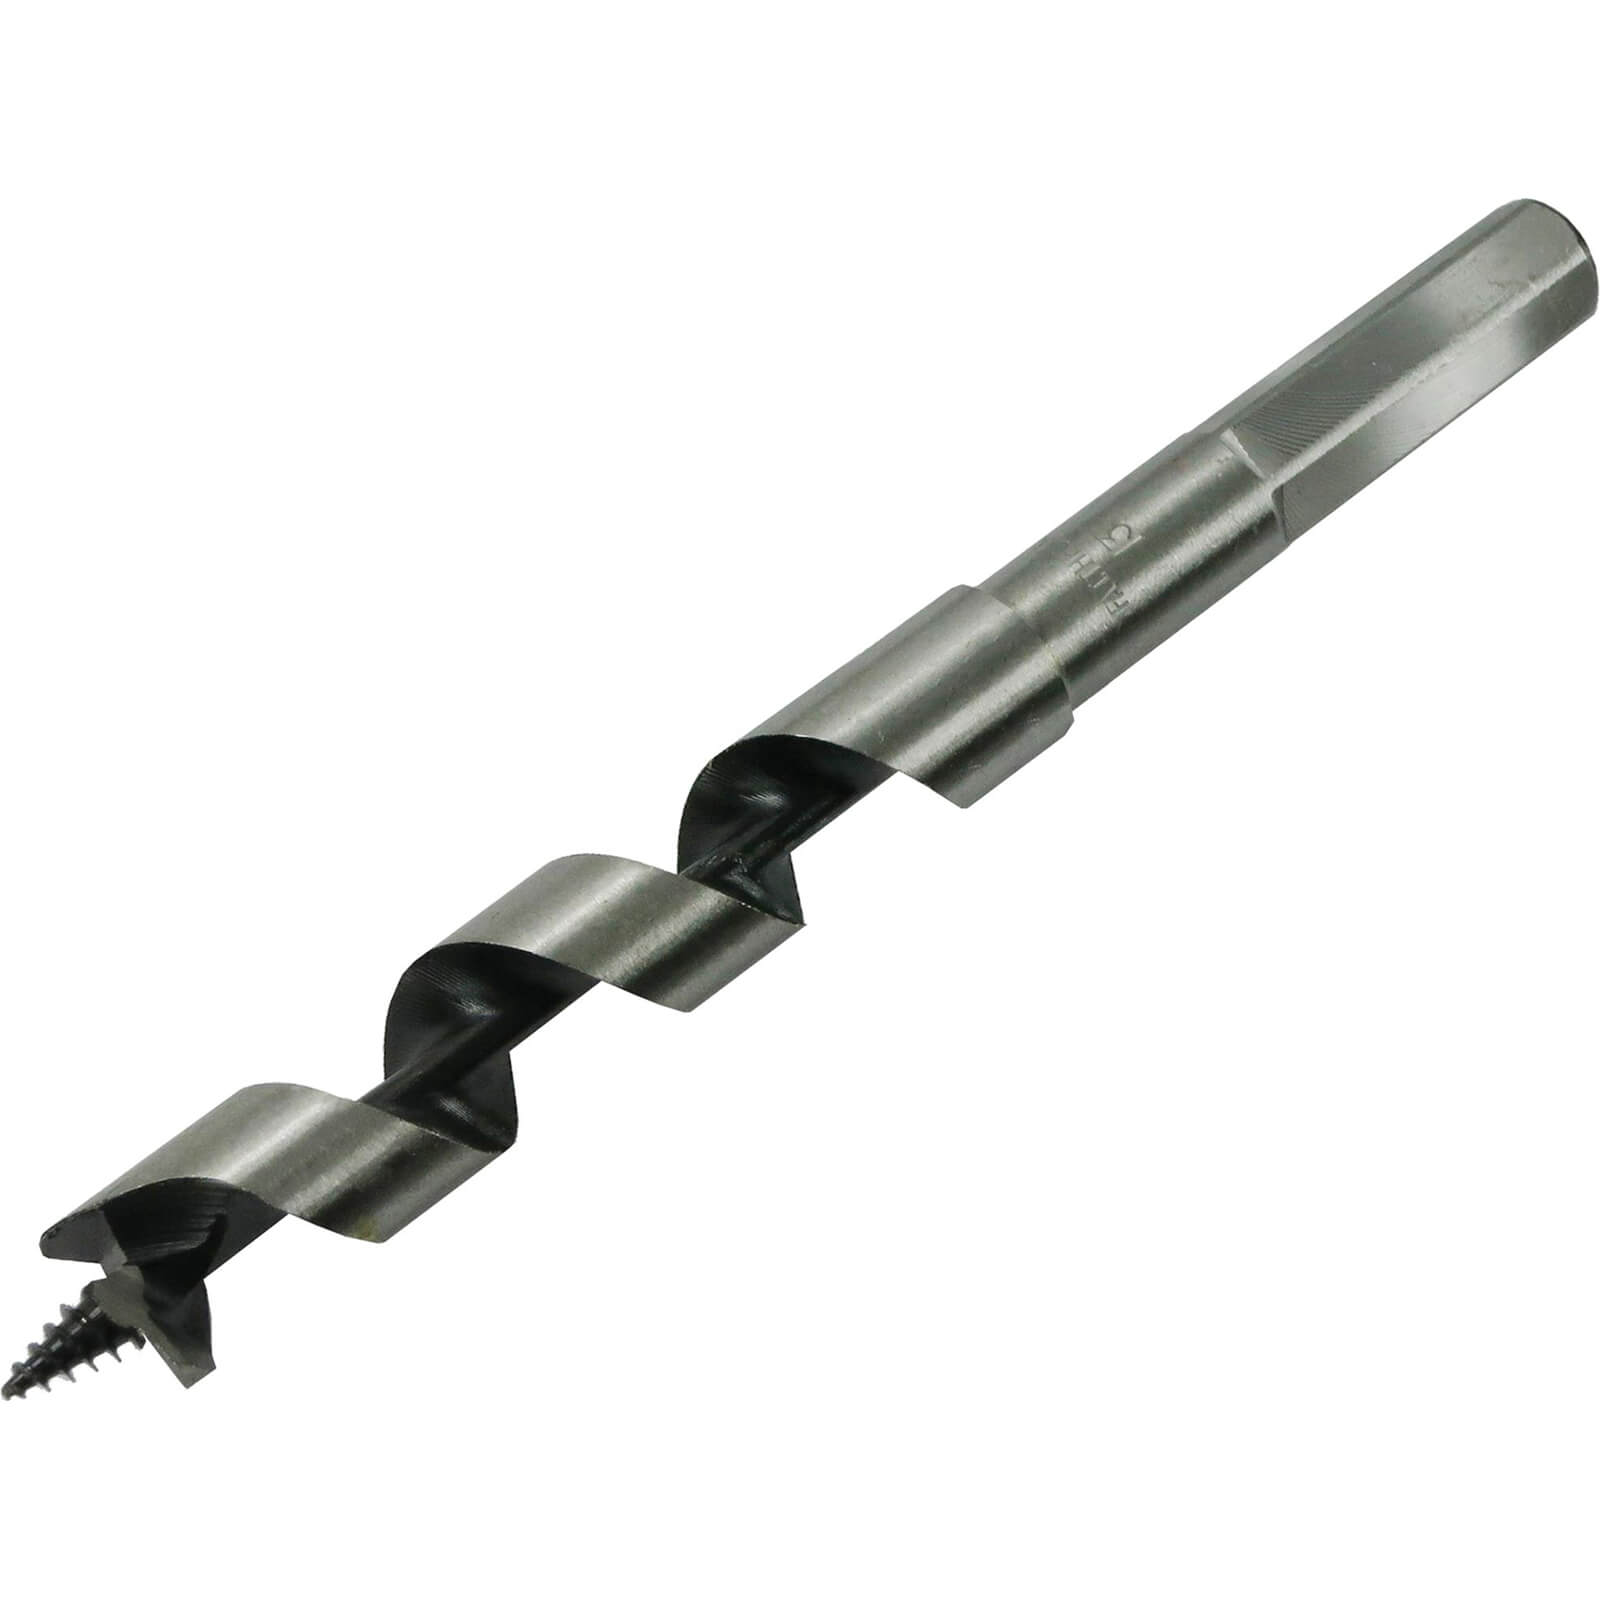 Image of Faithfull Combination Auger Drill Bit 13mm 120mm